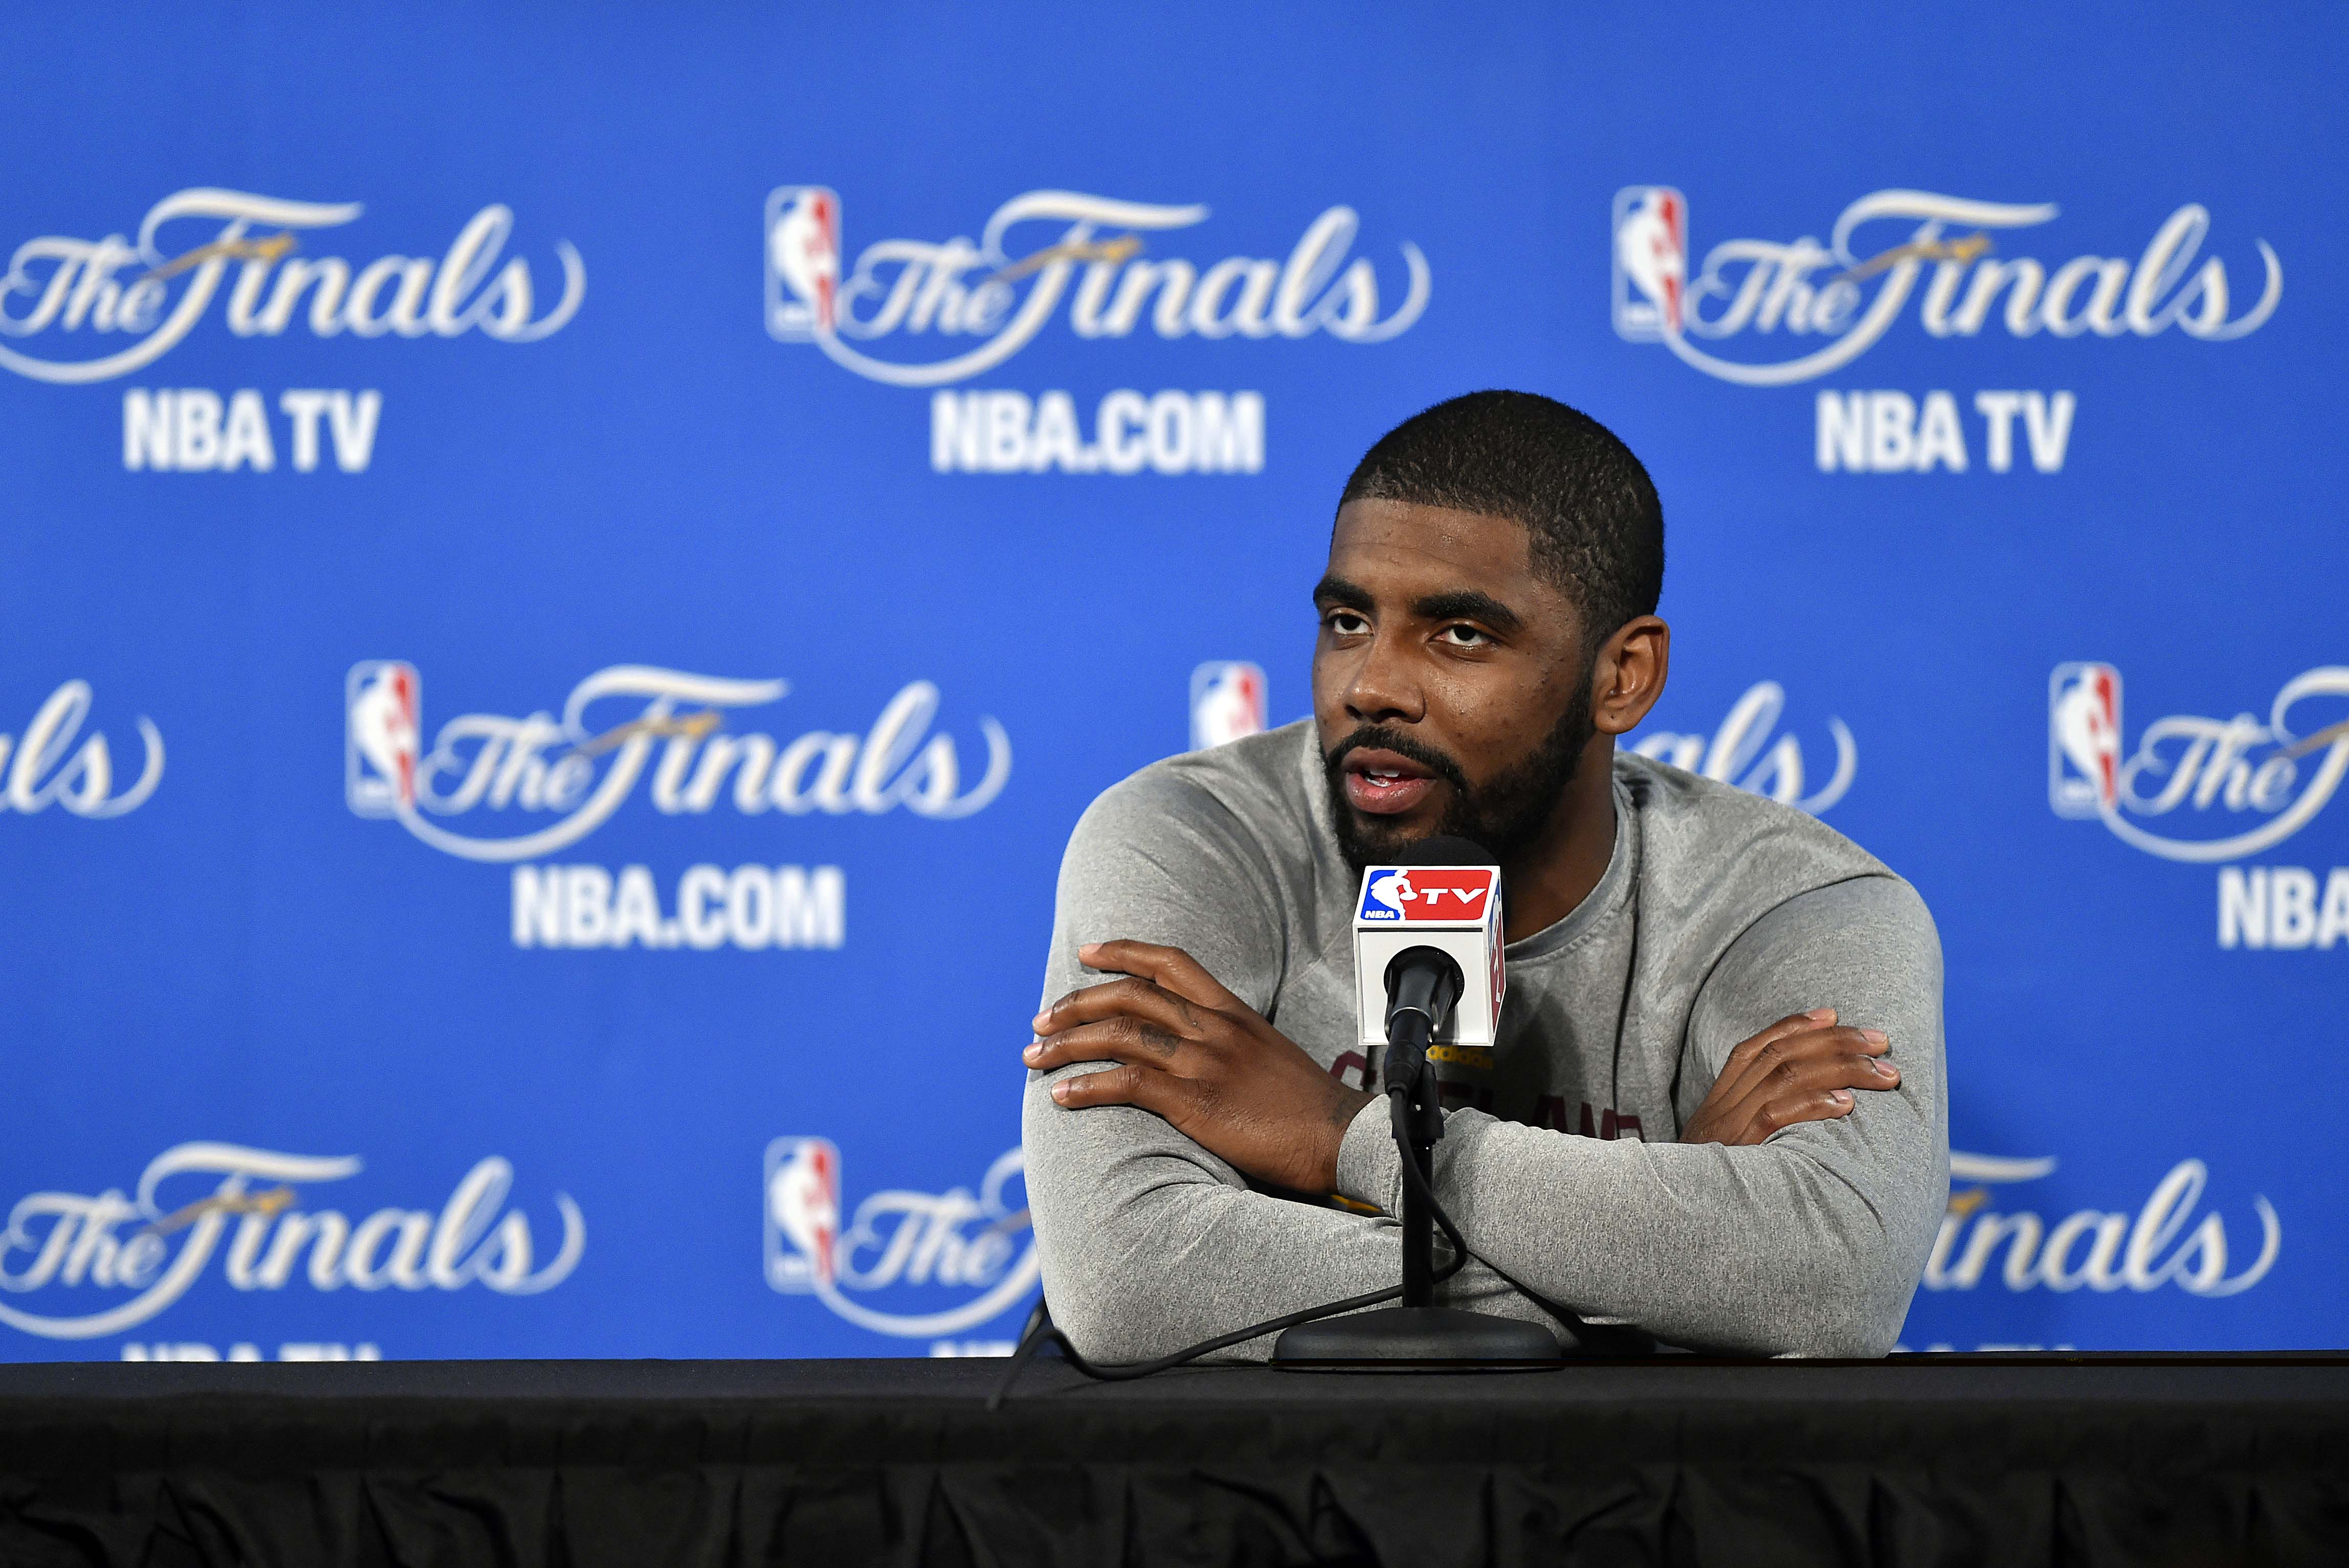 Kyrie Irving's productivity may determine the outcome of The Finals.